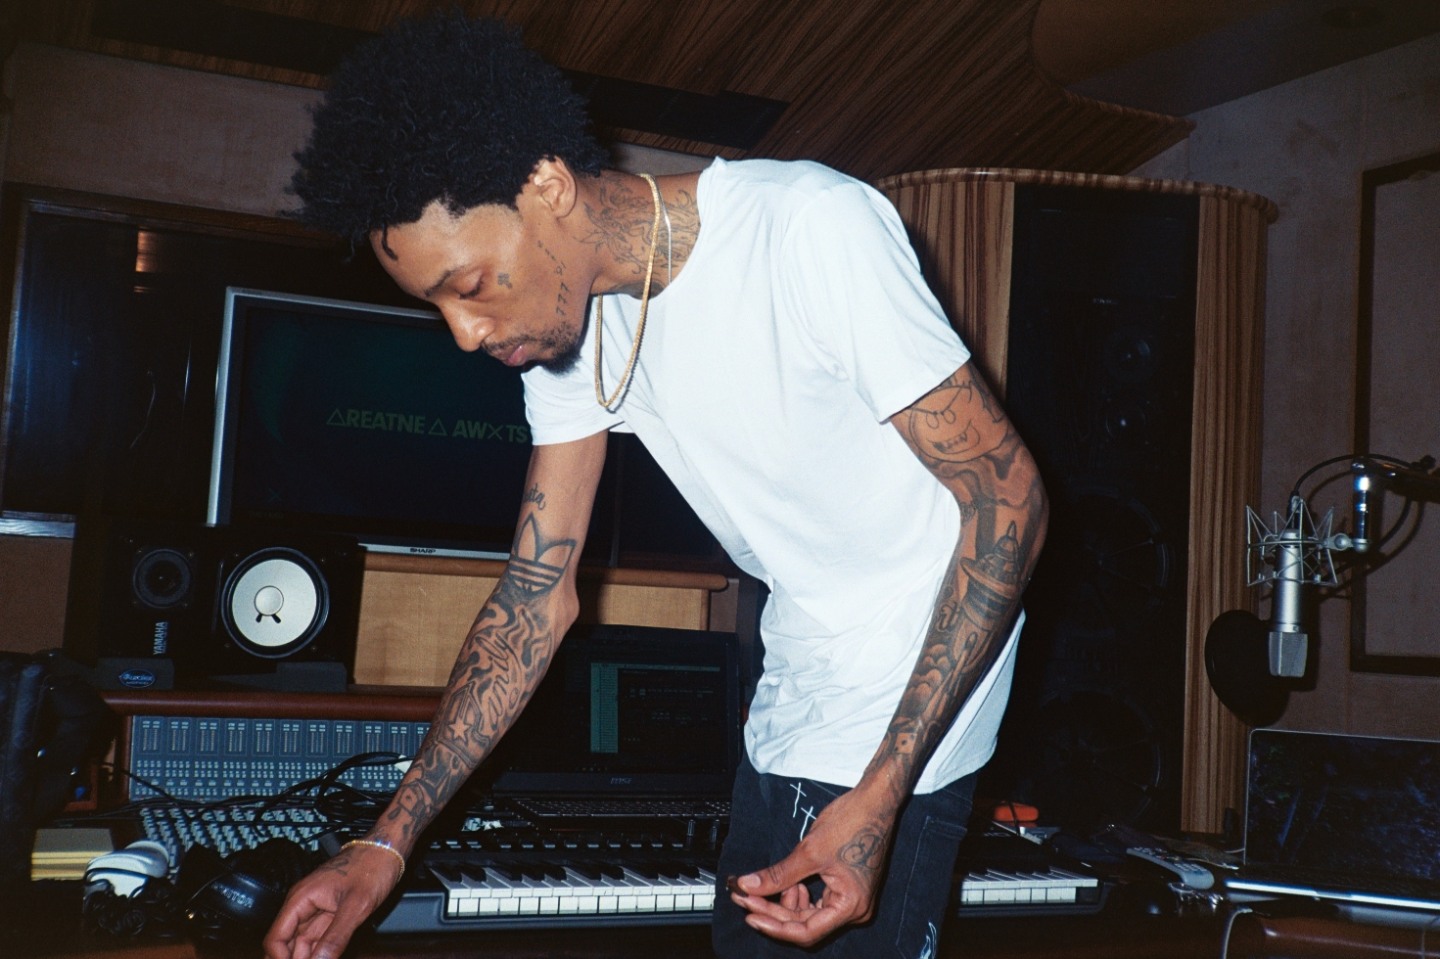 Protect Sonny Digital at all costs